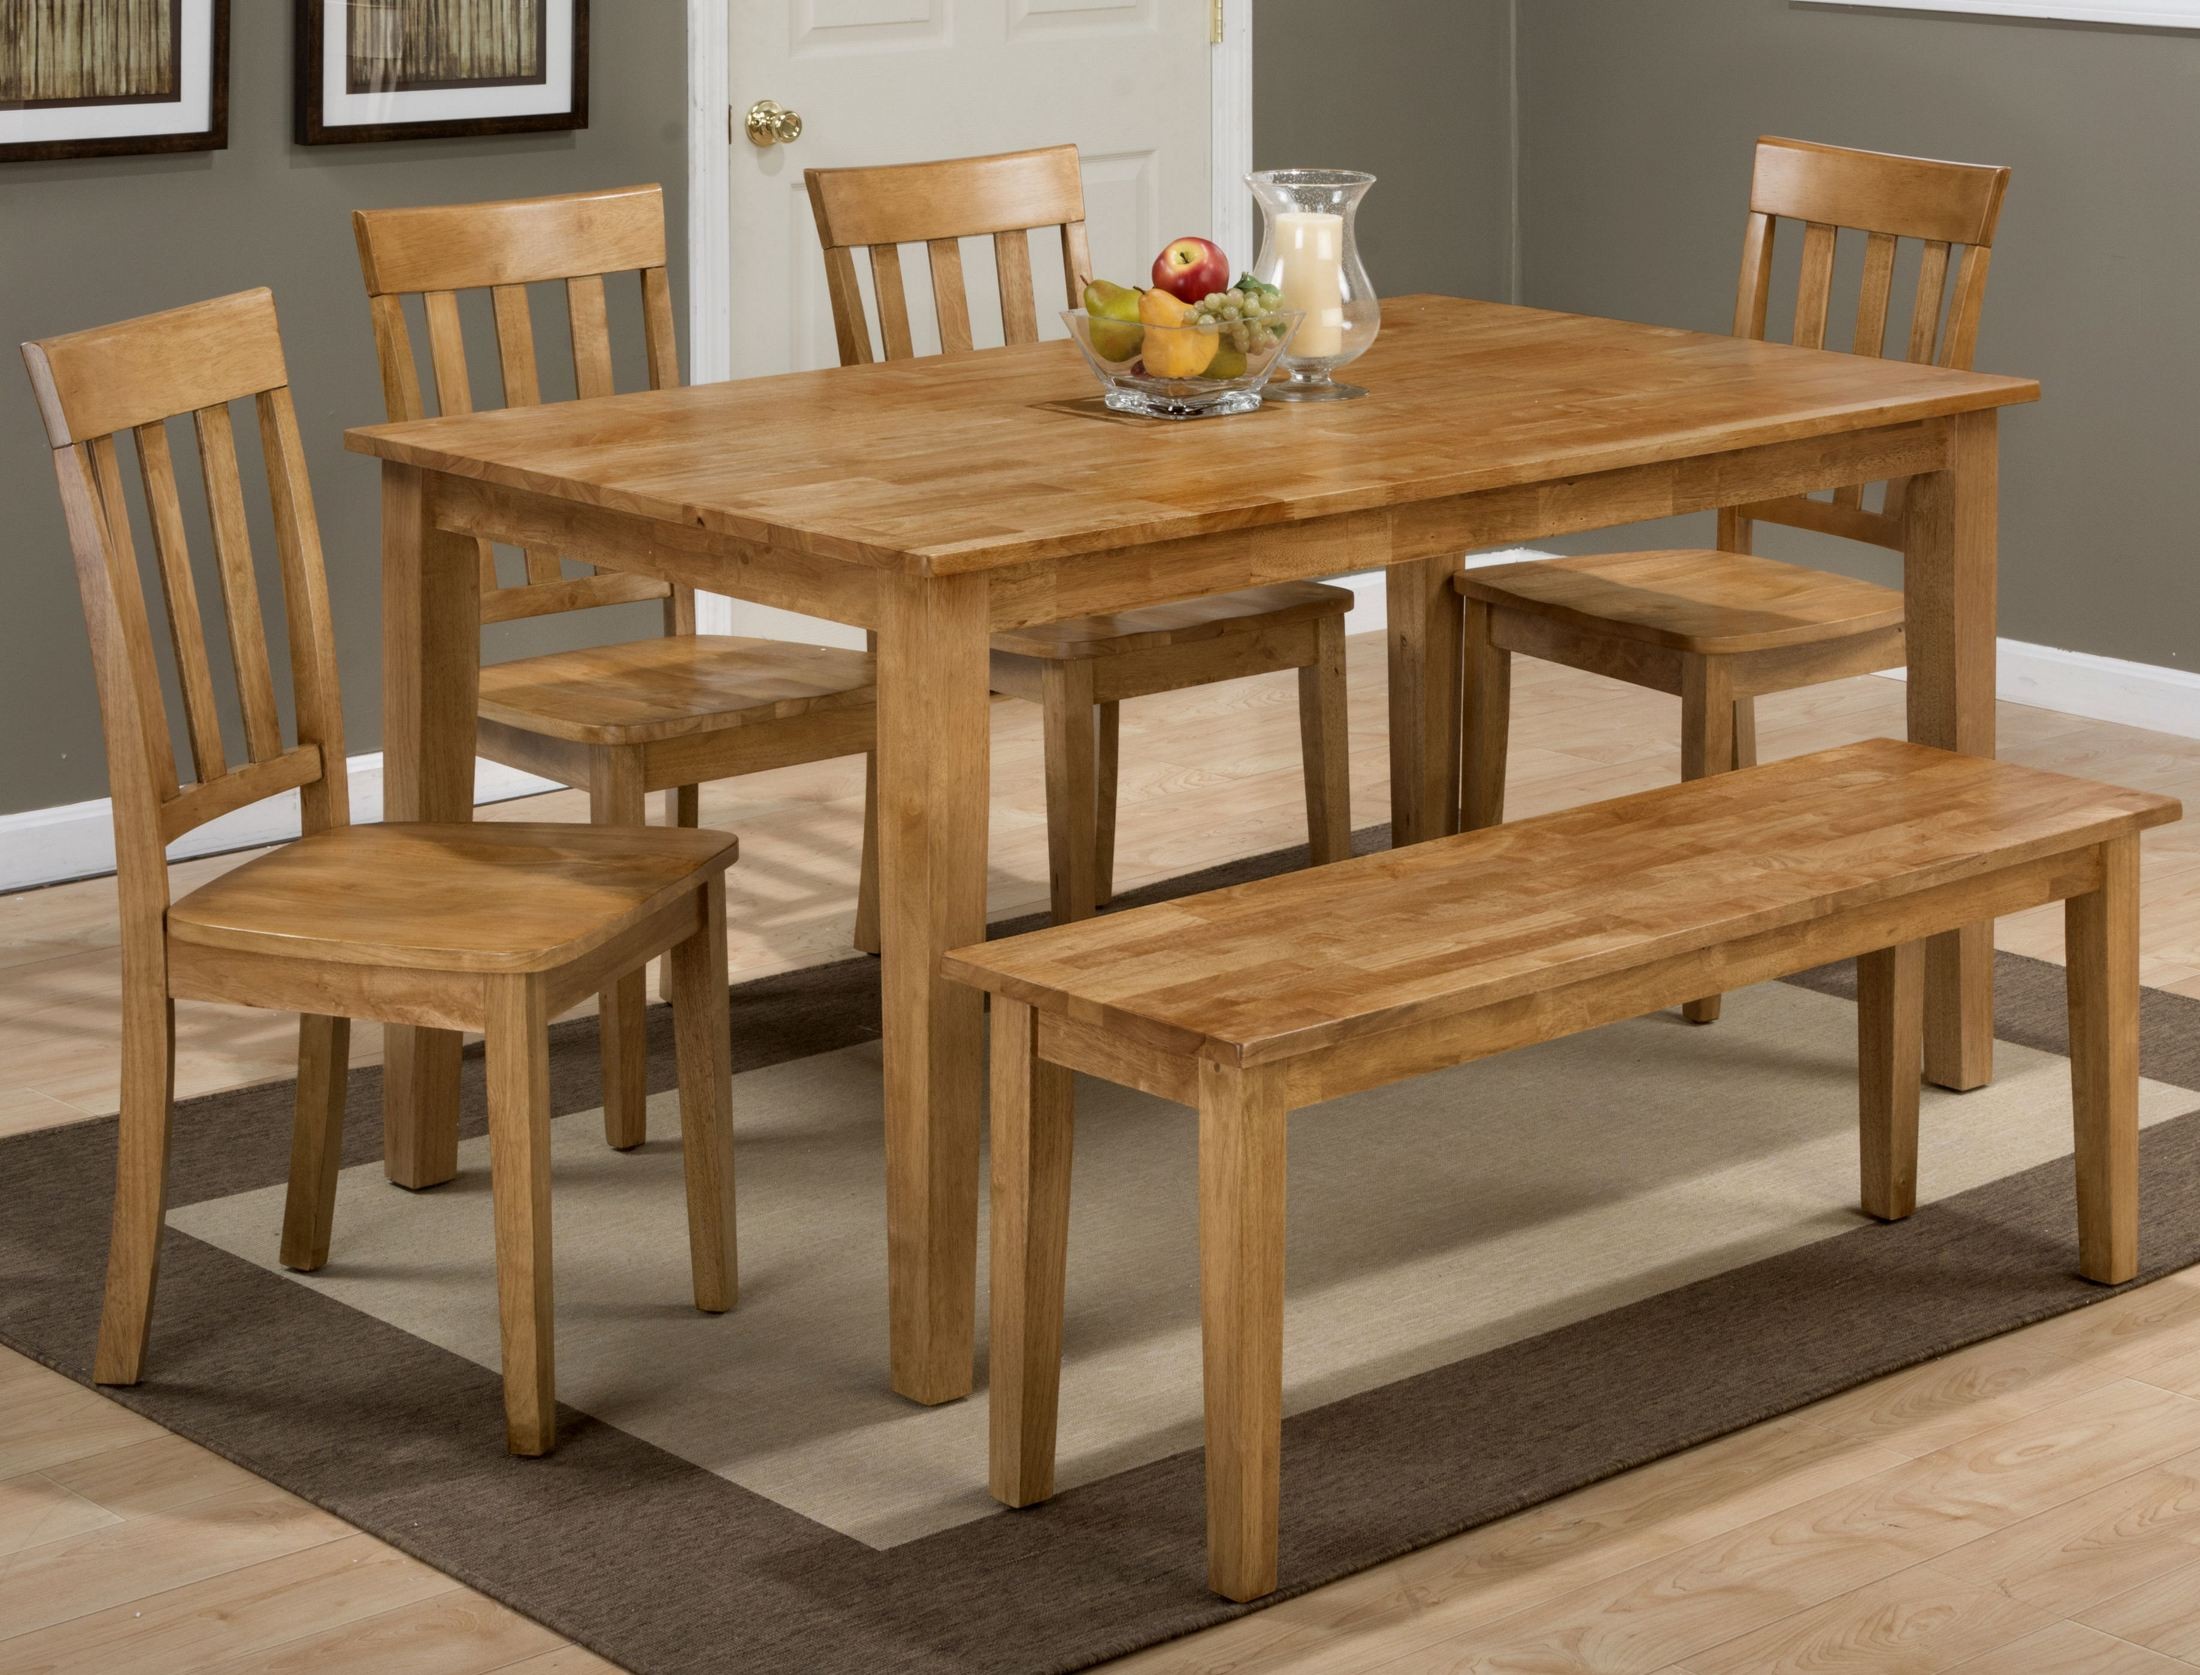 48 x 32 inch kitchen table